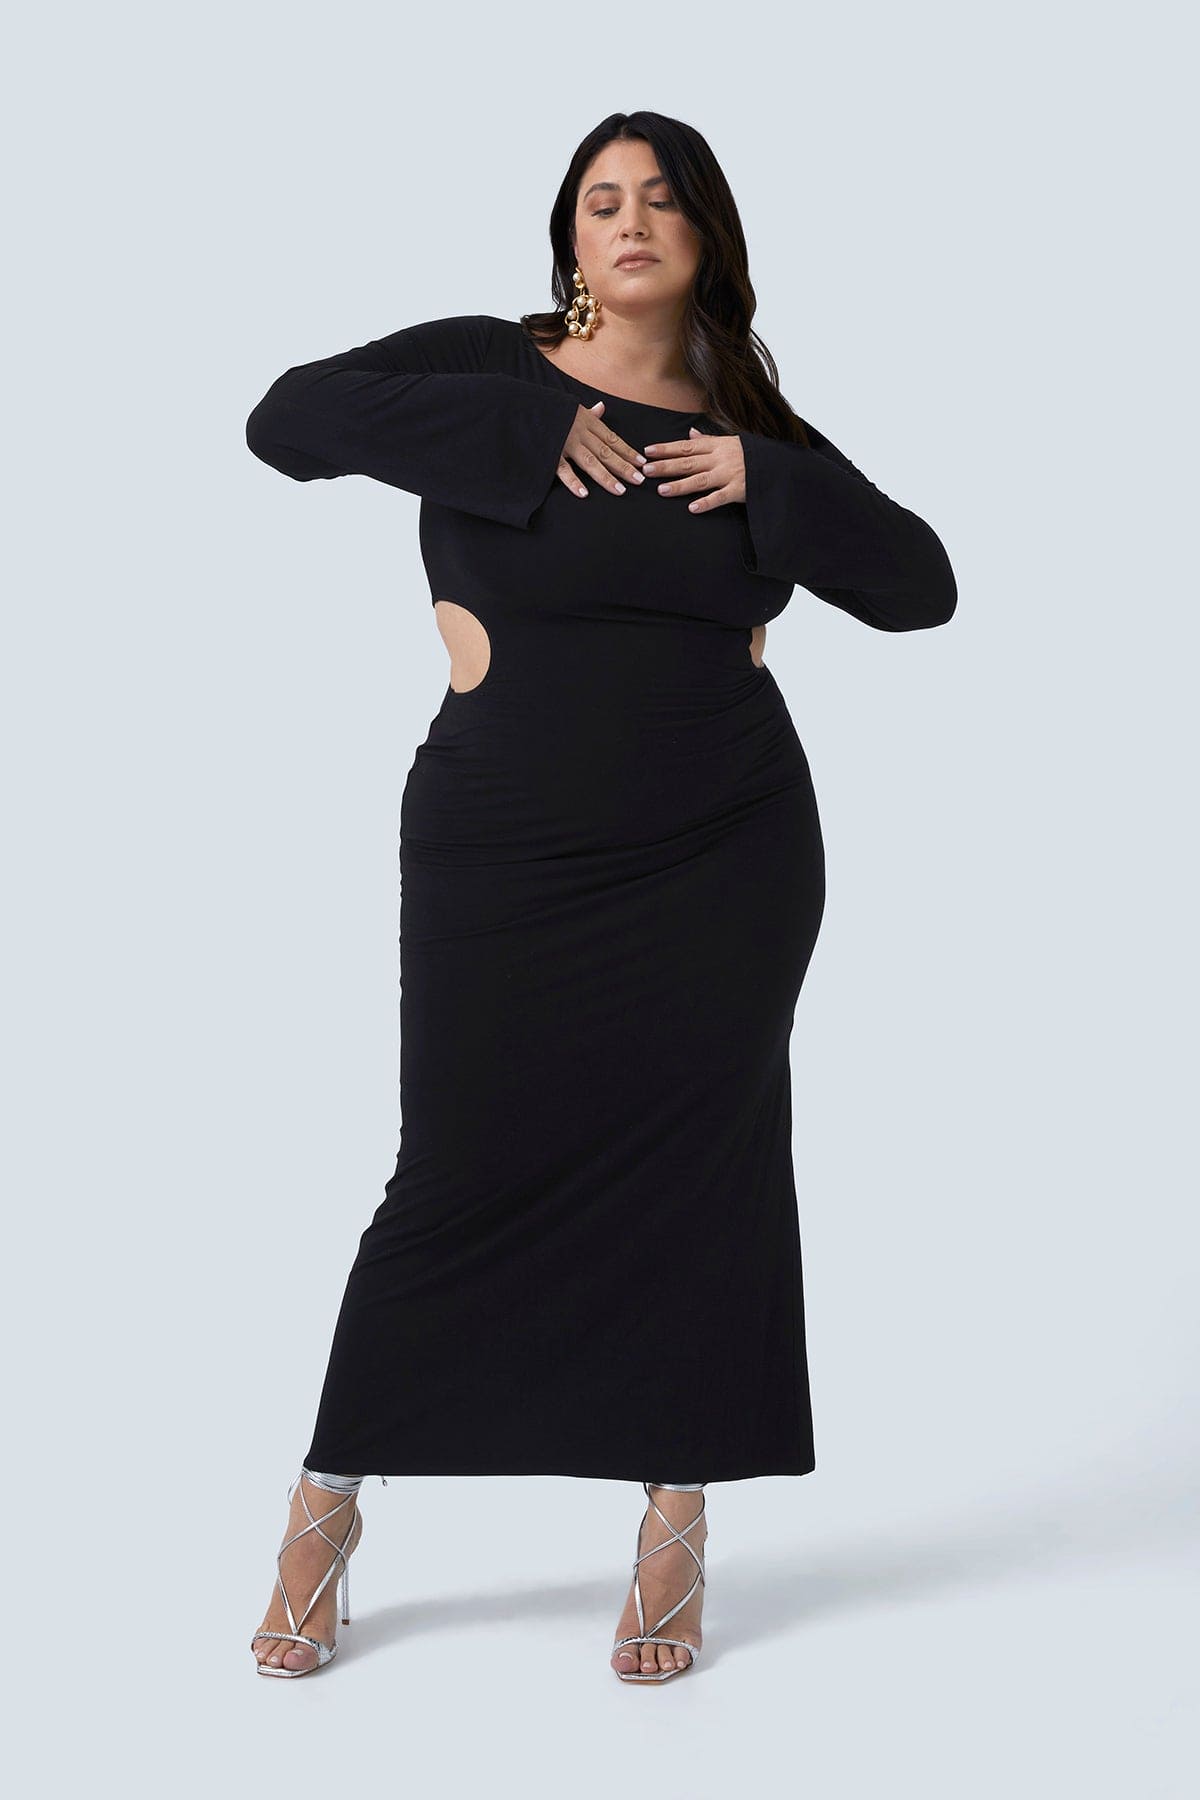 Plus size dress for women size 12-26. Gabrielle Maxi by Gia IRL plus size boutique. Model is standing with both hands on her heart. Model has hourglass figure.